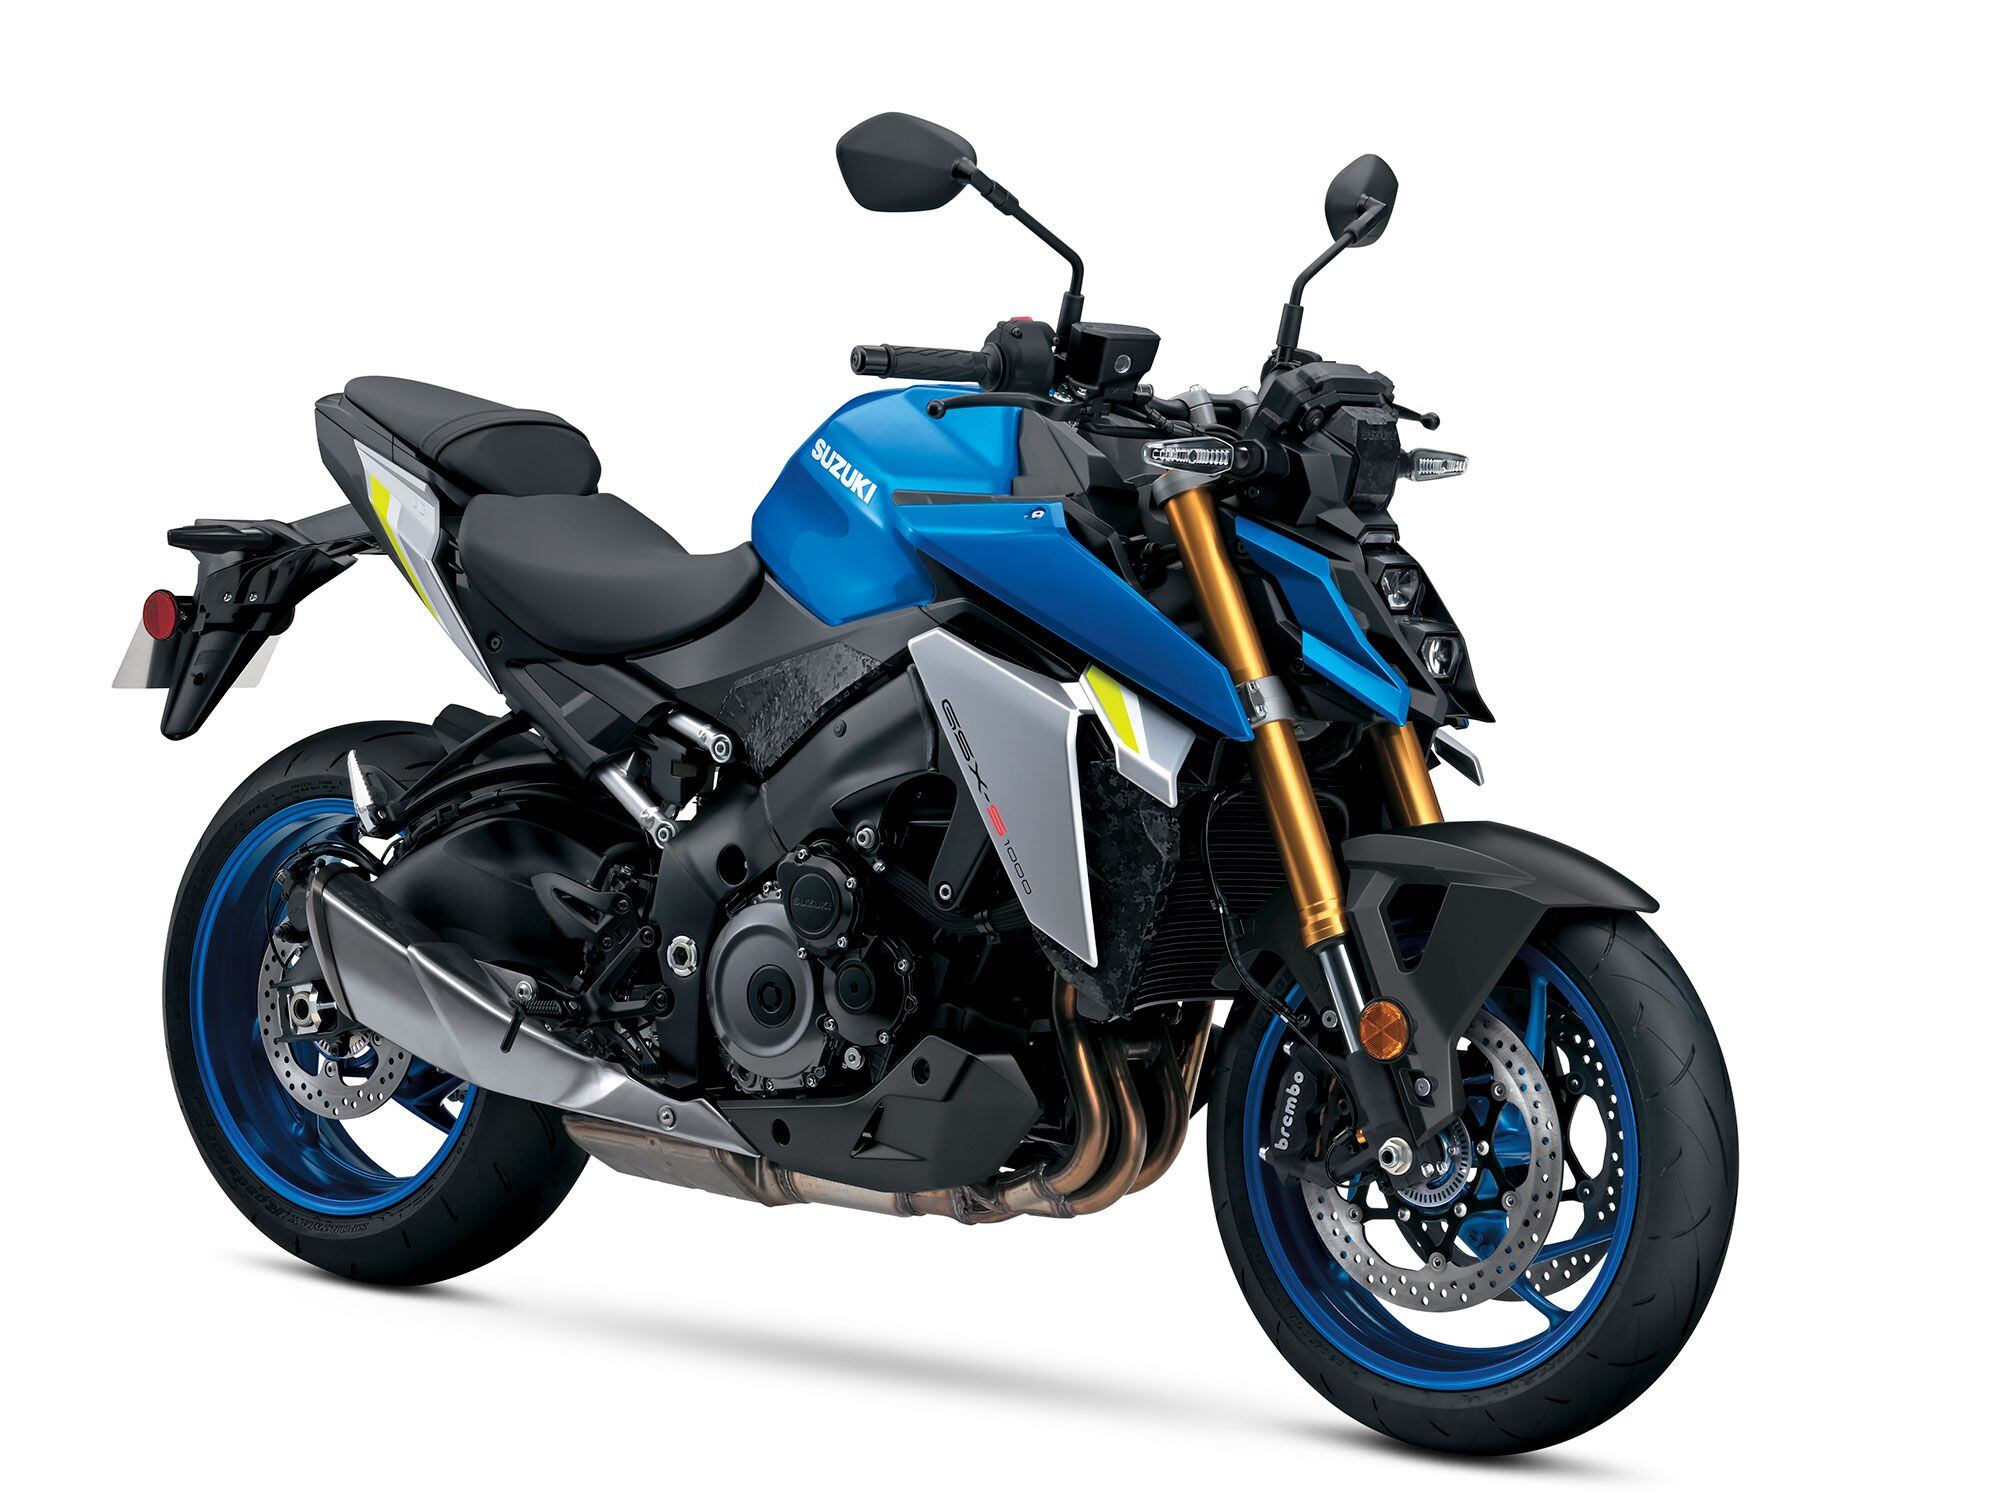 In its first update since the model launched in 2015, Suzuki sharpens the GSX-S1000 for 2022 with engine updates, added tech, and an angular face-lift.